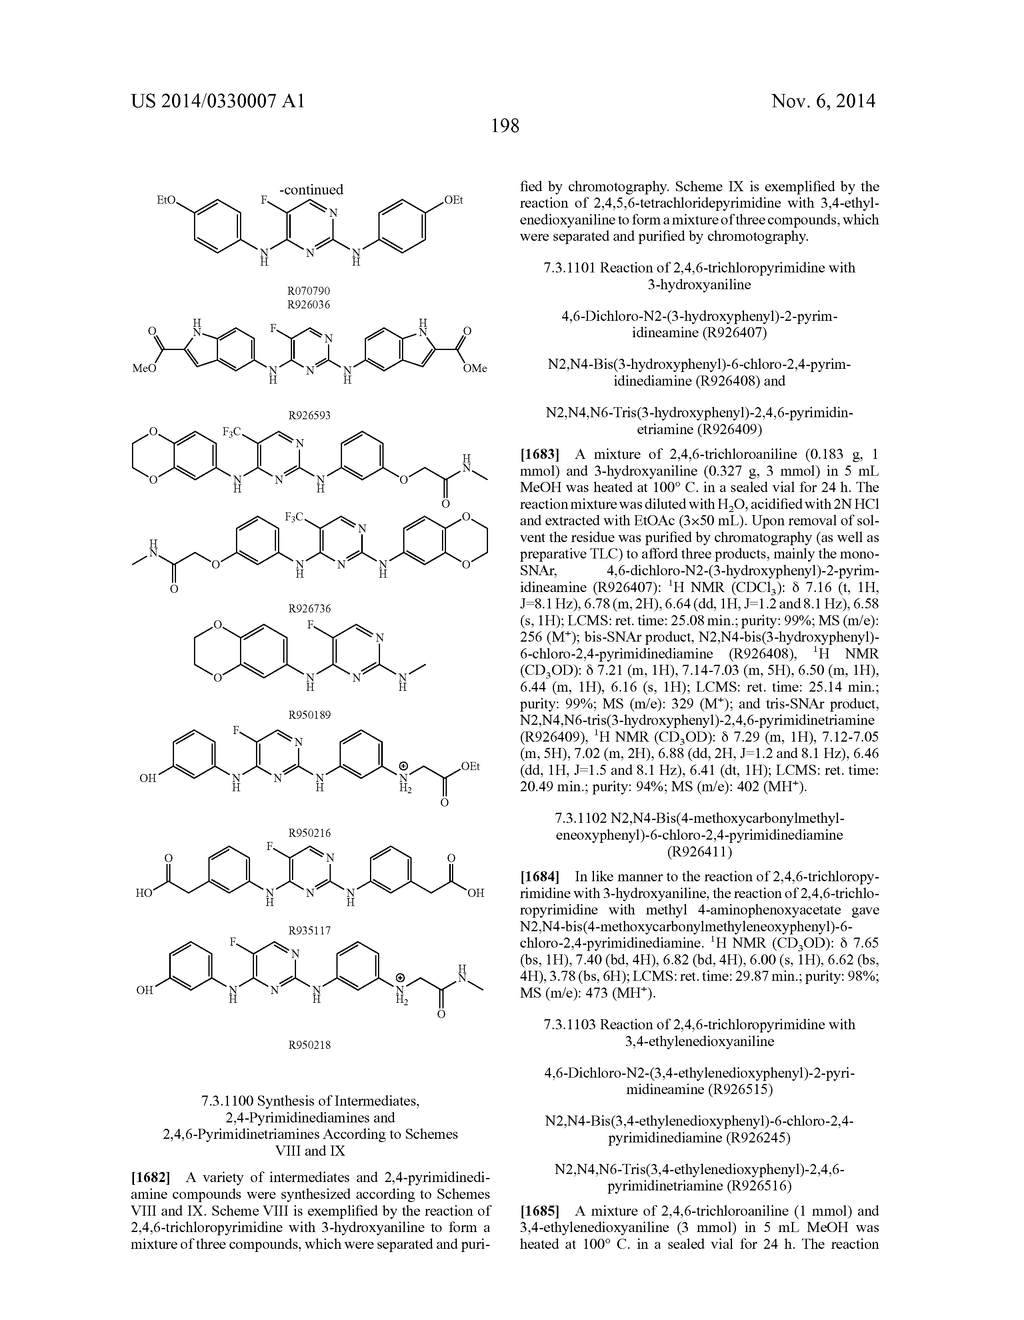 2,4-PYRIMIDINEDIAMINE COMPOUNDS AND THEIR USES - diagram, schematic, and image 213